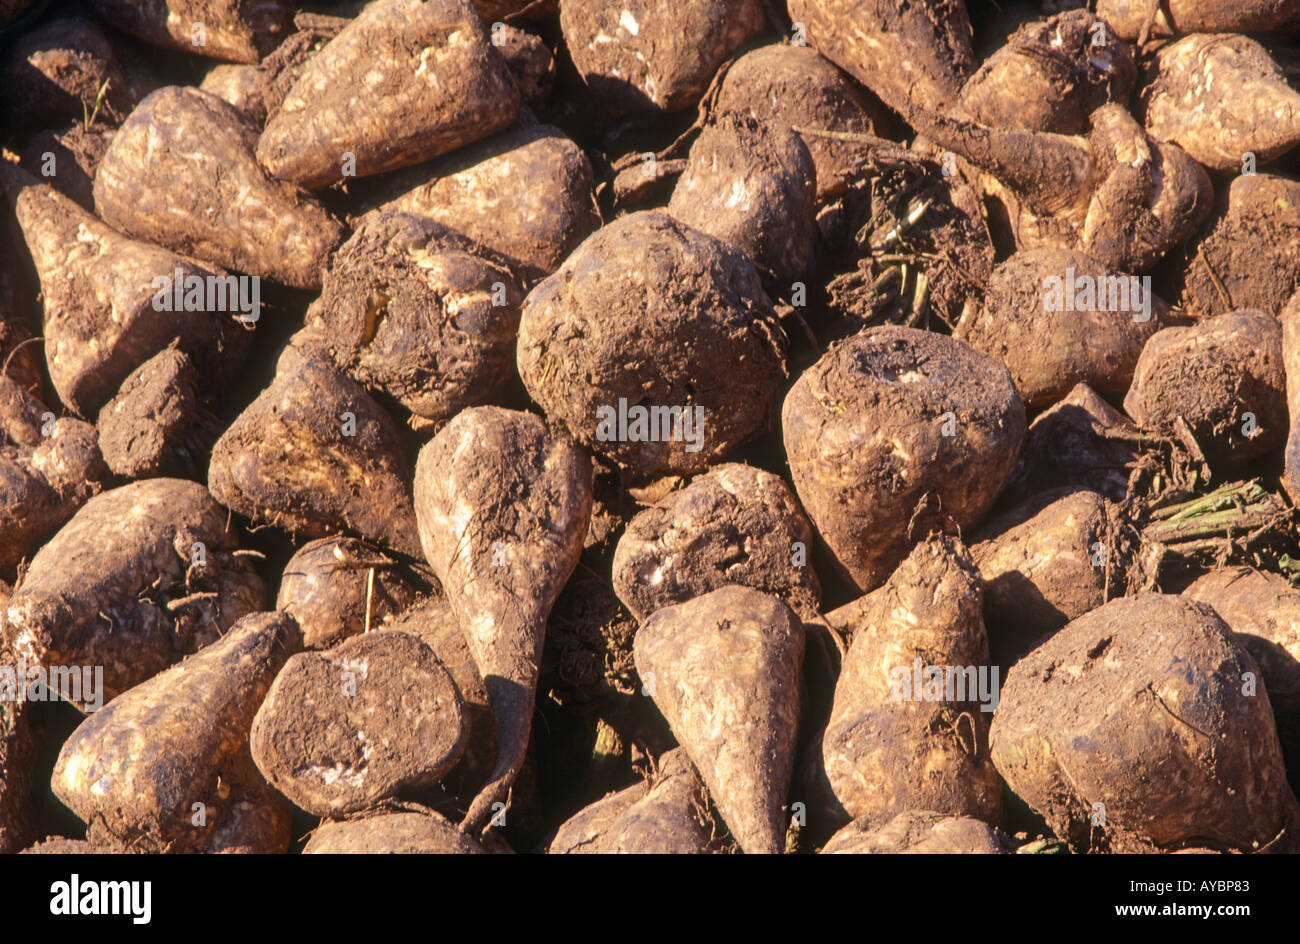 Sugar beet piled up after harvest Stock Photo